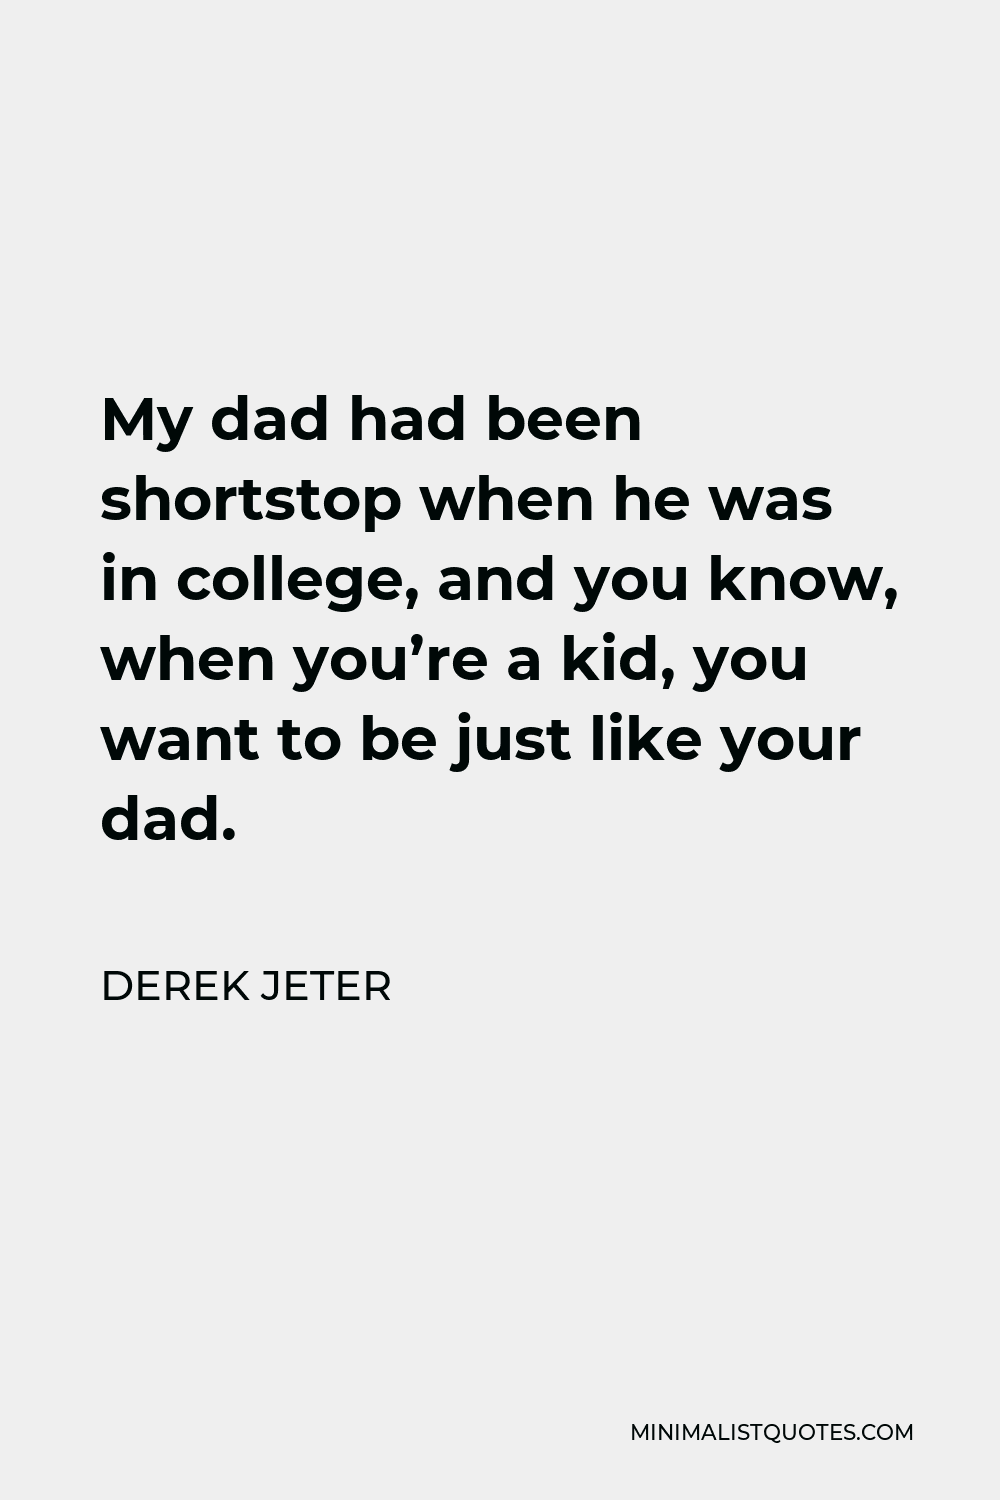 Derek Jeter Quote - My dad had been shortstop when he was in college, and you know, when you’re a kid, you want to be just like your dad.